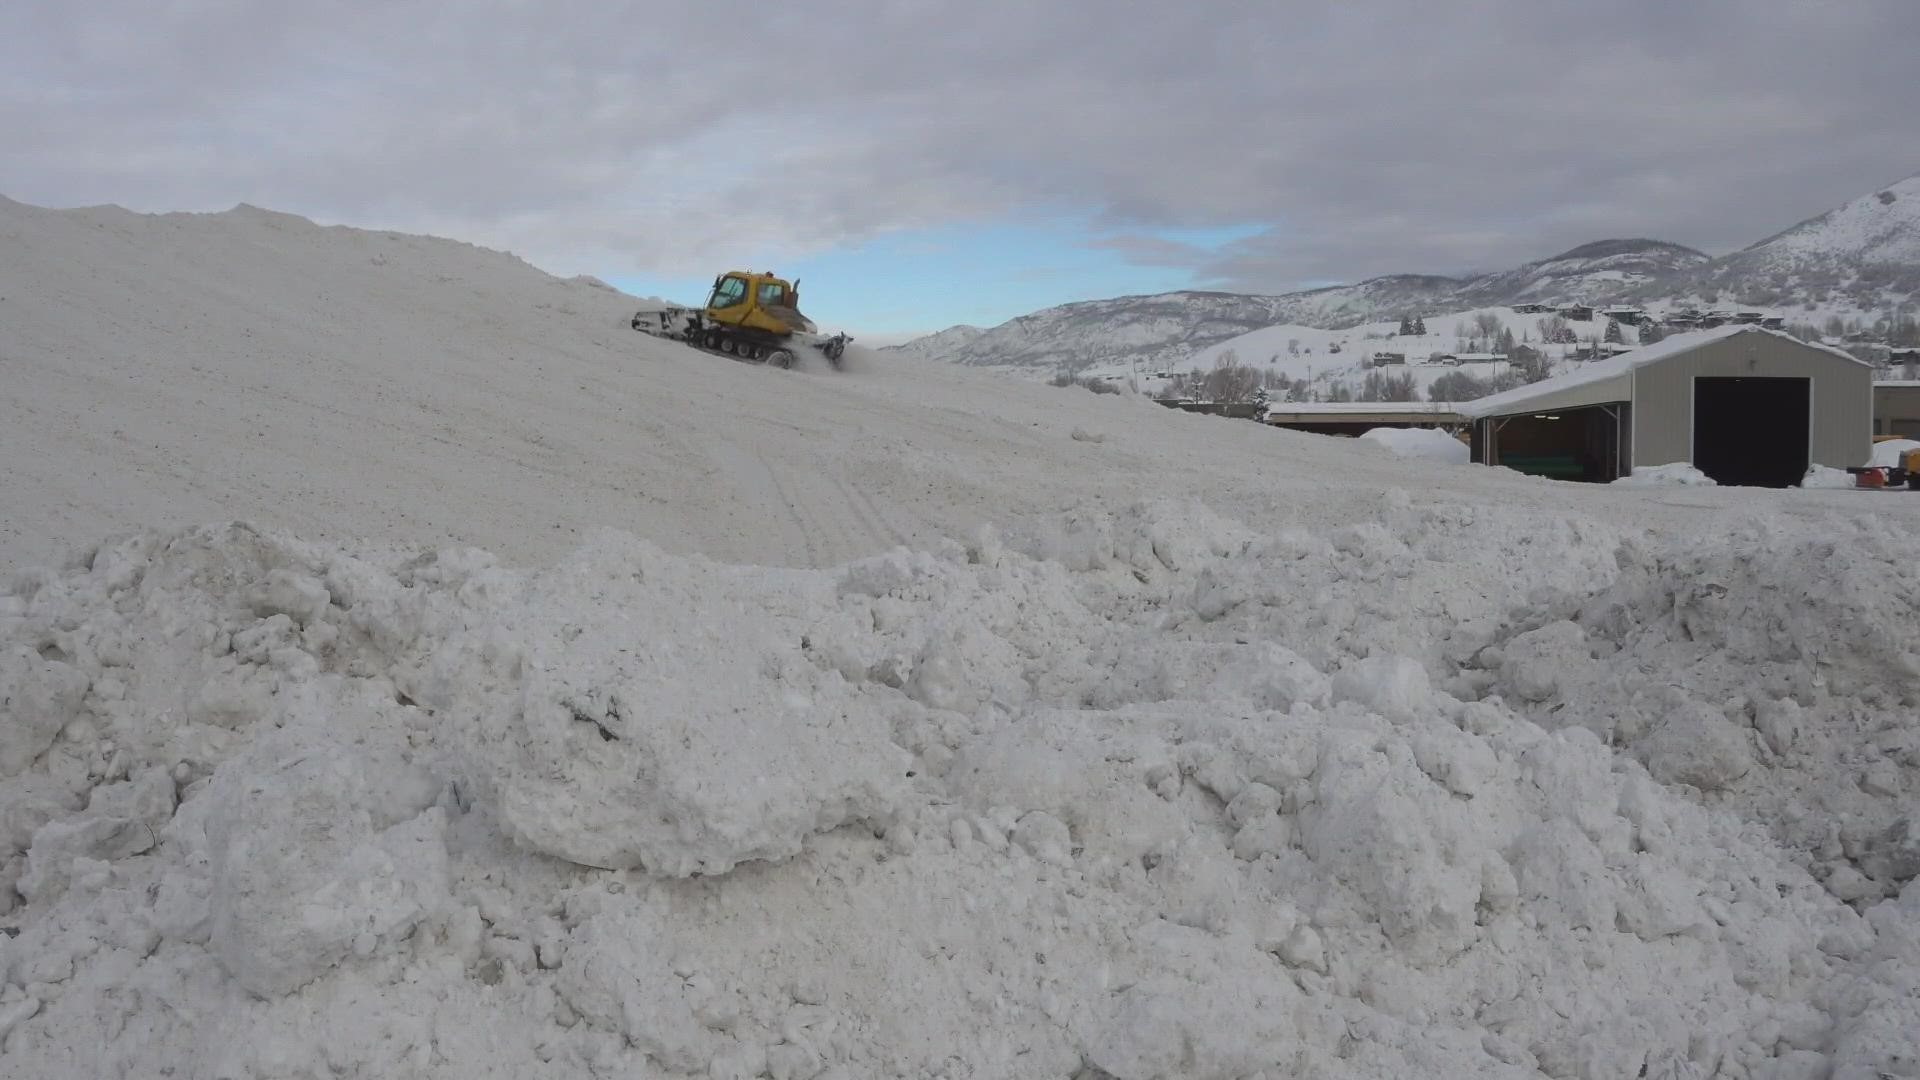 Dump trucks and snowcats are dealing with huge amounts of snow in Steamboat Springs, where it’s been piling up high this winter.